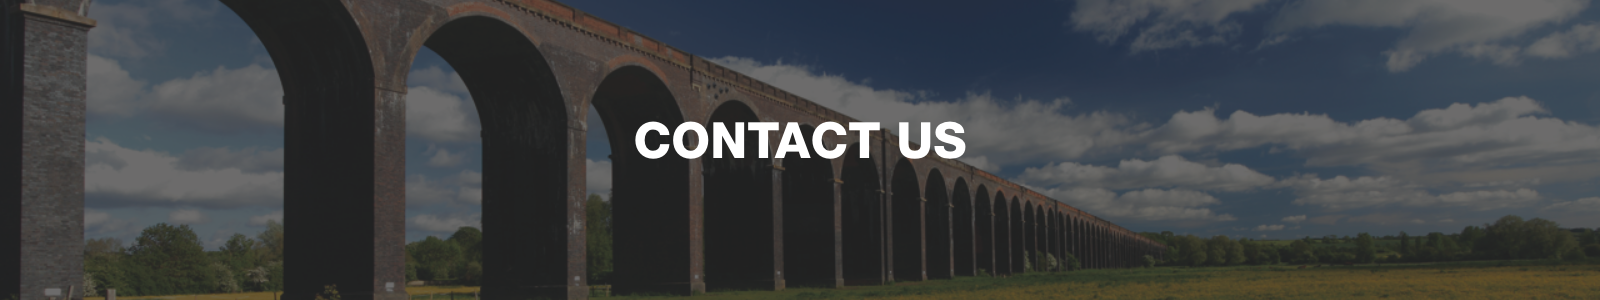 Contact banner